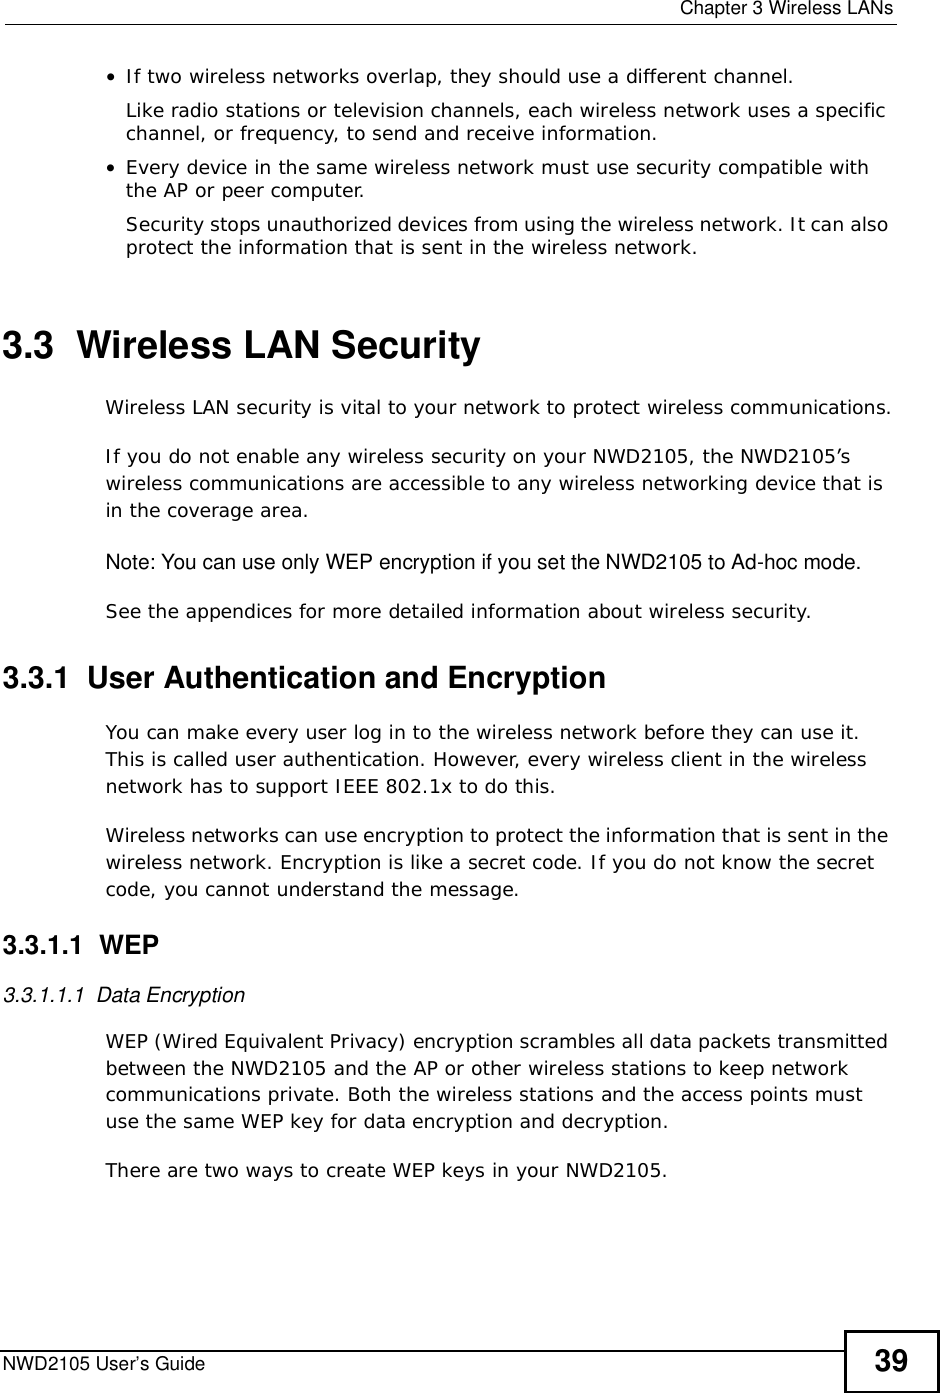  Chapter 3Wireless LANsNWD2105 User’s Guide 39•If two wireless networks overlap, they should use a different channel.Like radio stations or television channels, each wireless network uses a specific channel, or frequency, to send and receive information.•Every device in the same wireless network must use security compatible with the AP or peer computer.Security stops unauthorized devices from using the wireless network. It can also protect the information that is sent in the wireless network.3.3  Wireless LAN Security Wireless LAN security is vital to your network to protect wireless communications.If you do not enable any wireless security on your NWD2105, the NWD2105’s wireless communications are accessible to any wireless networking device that is in the coverage area. Note: You can use only WEP encryption if you set the NWD2105 to Ad-hoc mode.See the appendices for more detailed information about wireless security.3.3.1  User Authentication and EncryptionYou can make every user log in to the wireless network before they can use it. This is called user authentication. However, every wireless client in the wireless network has to support IEEE 802.1x to do this.Wireless networks can use encryption to protect the information that is sent in the wireless network. Encryption is like a secret code. If you do not know the secret code, you cannot understand the message.3.3.1.1  WEP3.3.1.1.1  Data Encryption WEP (Wired Equivalent Privacy) encryption scrambles all data packets transmitted between the NWD2105 and the AP or other wireless stations to keep network communications private. Both the wireless stations and the access points must use the same WEP key for data encryption and decryption.There are two ways to create WEP keys in your NWD2105.